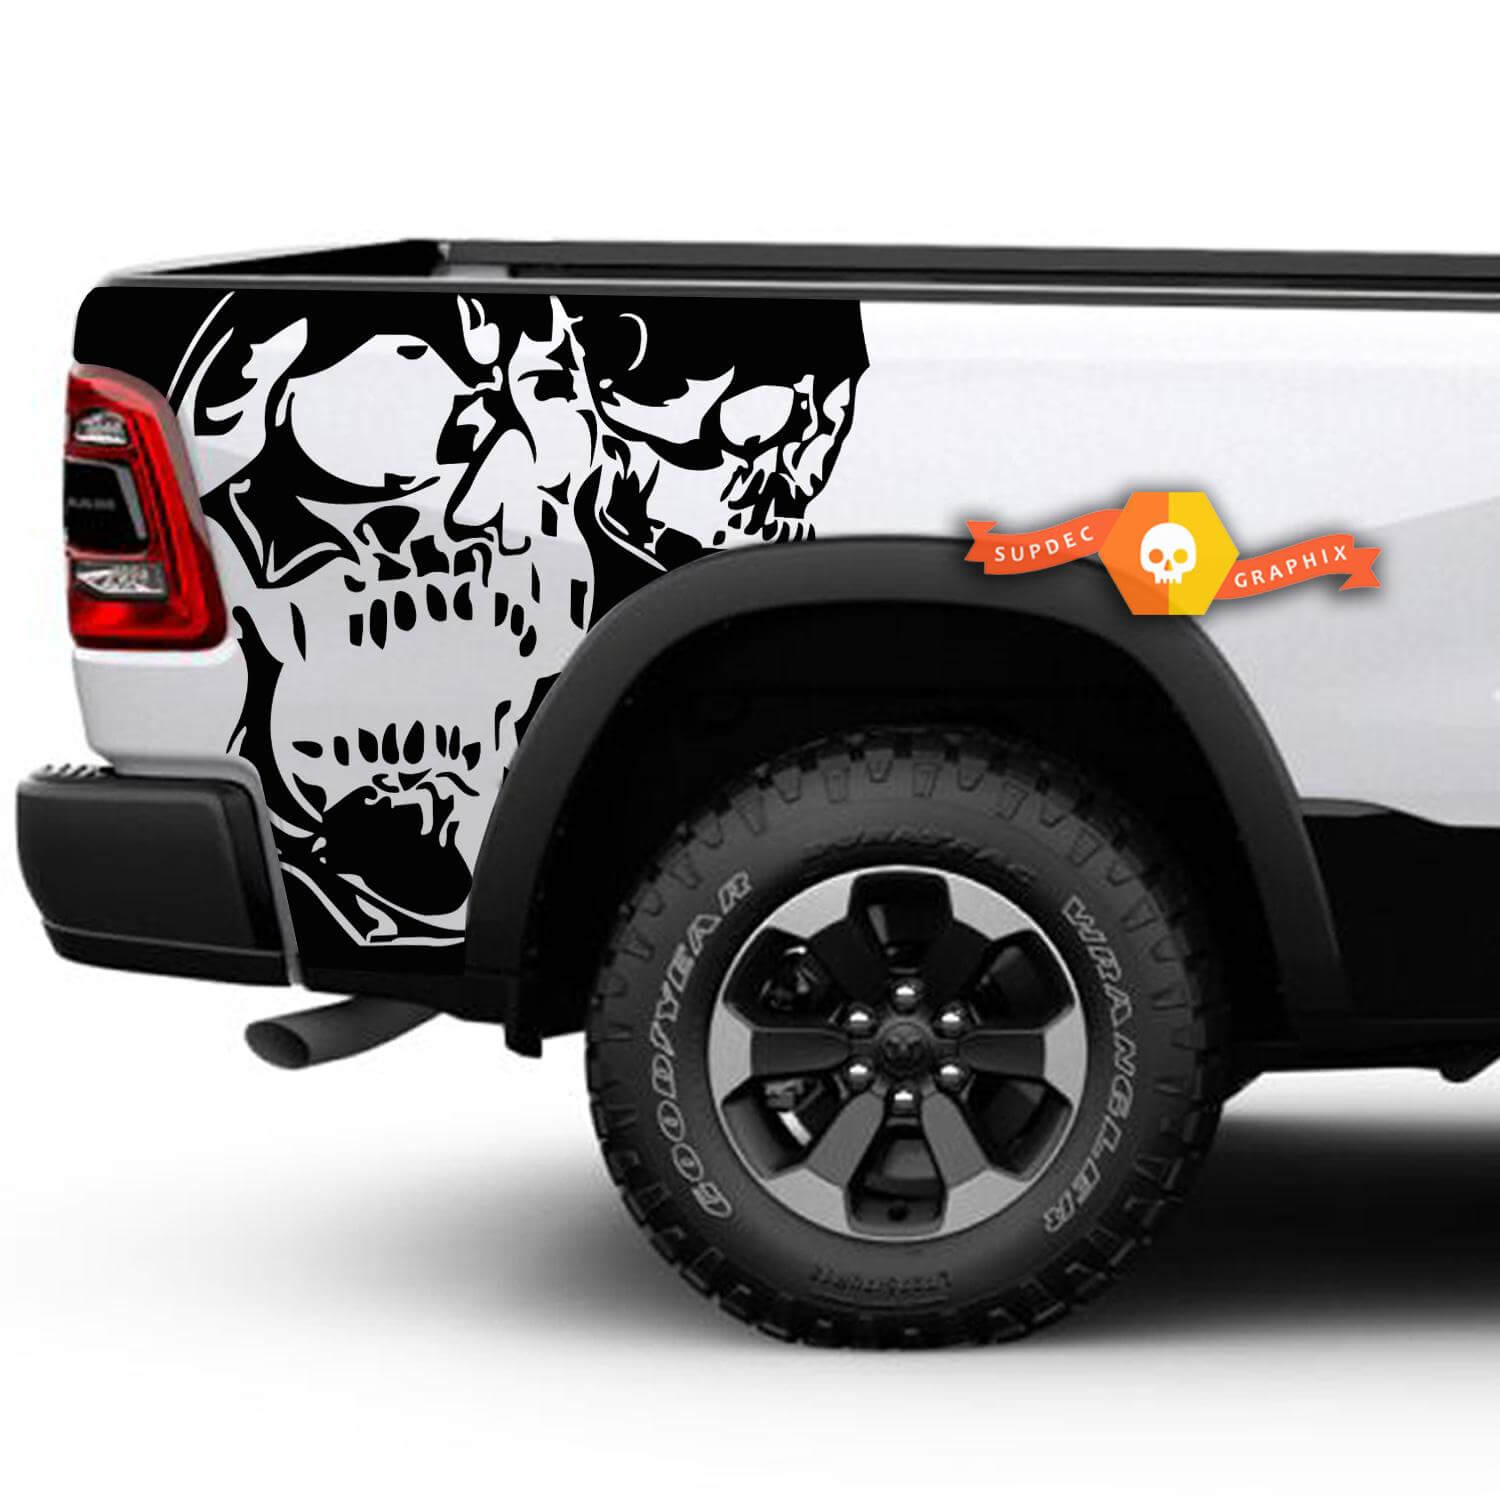 Dodge Ram Truck 1500/2500 two SKULL Graphic decals stickers fits models 2009-2014